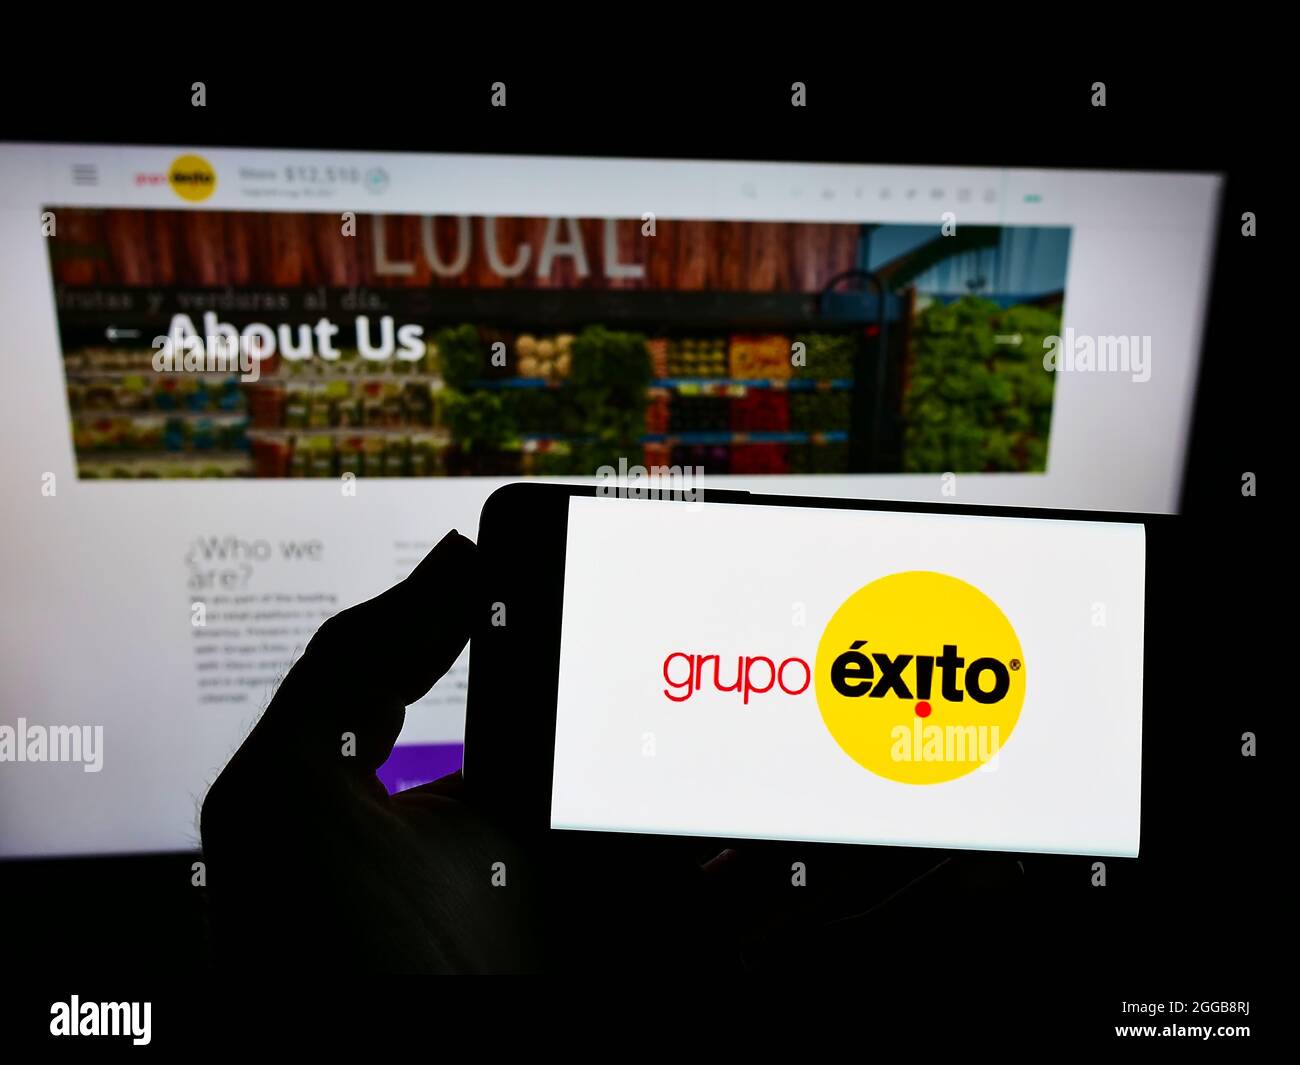 Person holding smartphone with logo of company Almacenes Éxito S.A. (Grupo Éxito) on screen in front of website. Focus on phone display. Stock Photo